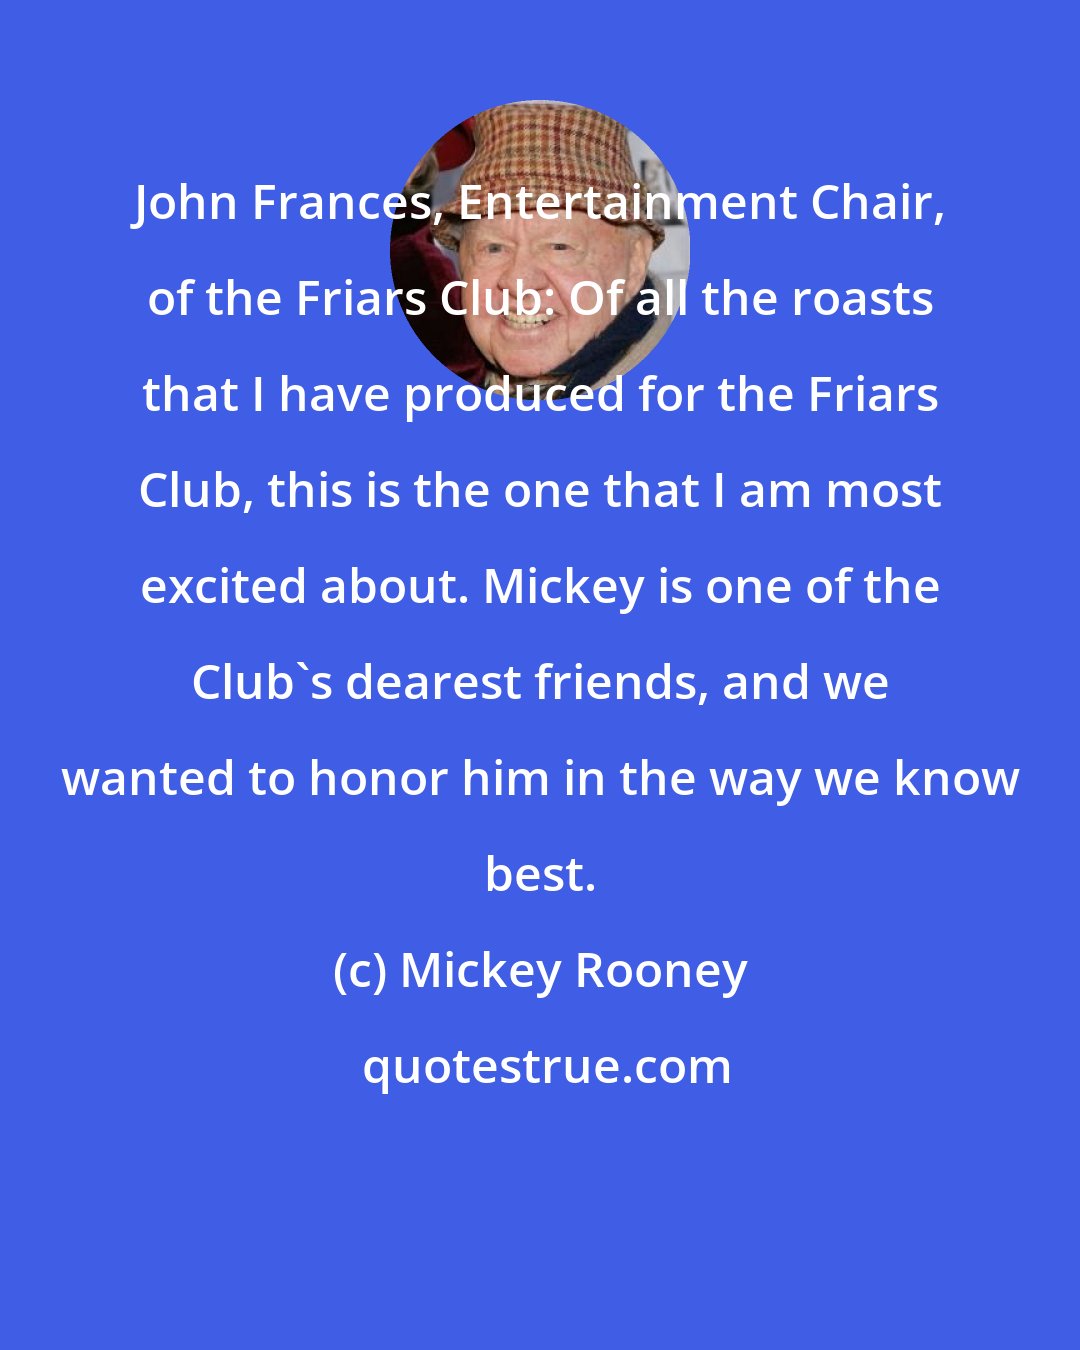 Mickey Rooney: John Frances, Entertainment Chair, of the Friars Club: Of all the roasts that I have produced for the Friars Club, this is the one that I am most excited about. Mickey is one of the Club's dearest friends, and we wanted to honor him in the way we know best.